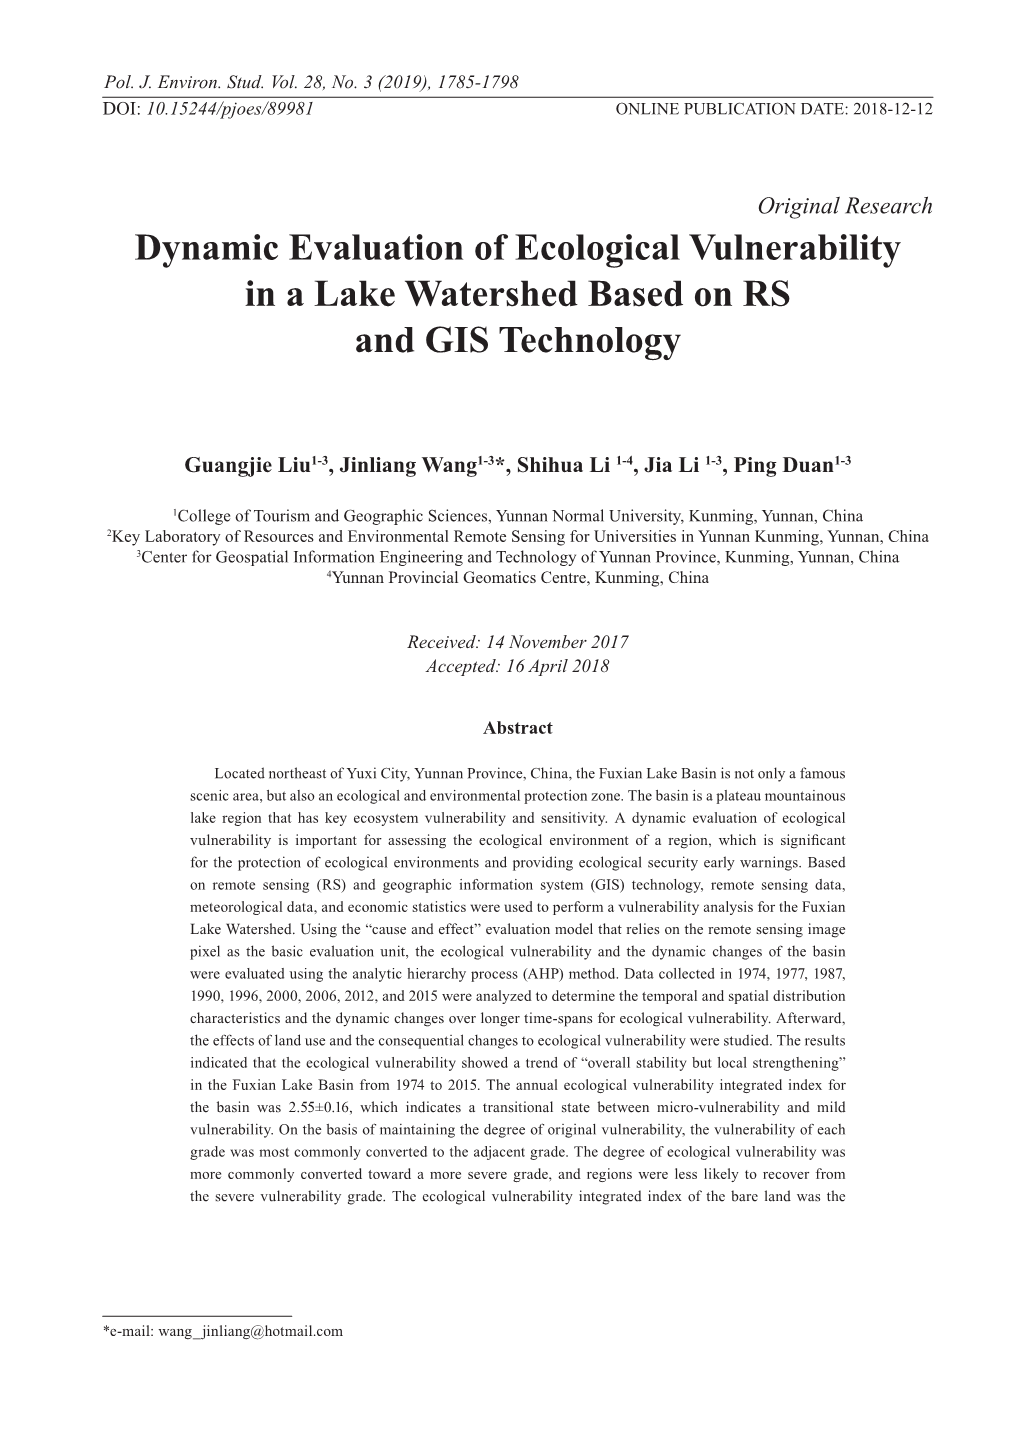 Dynamic Evaluation of Ecological Vulnerability in a Lake Watershed Based on RS and GIS Technology